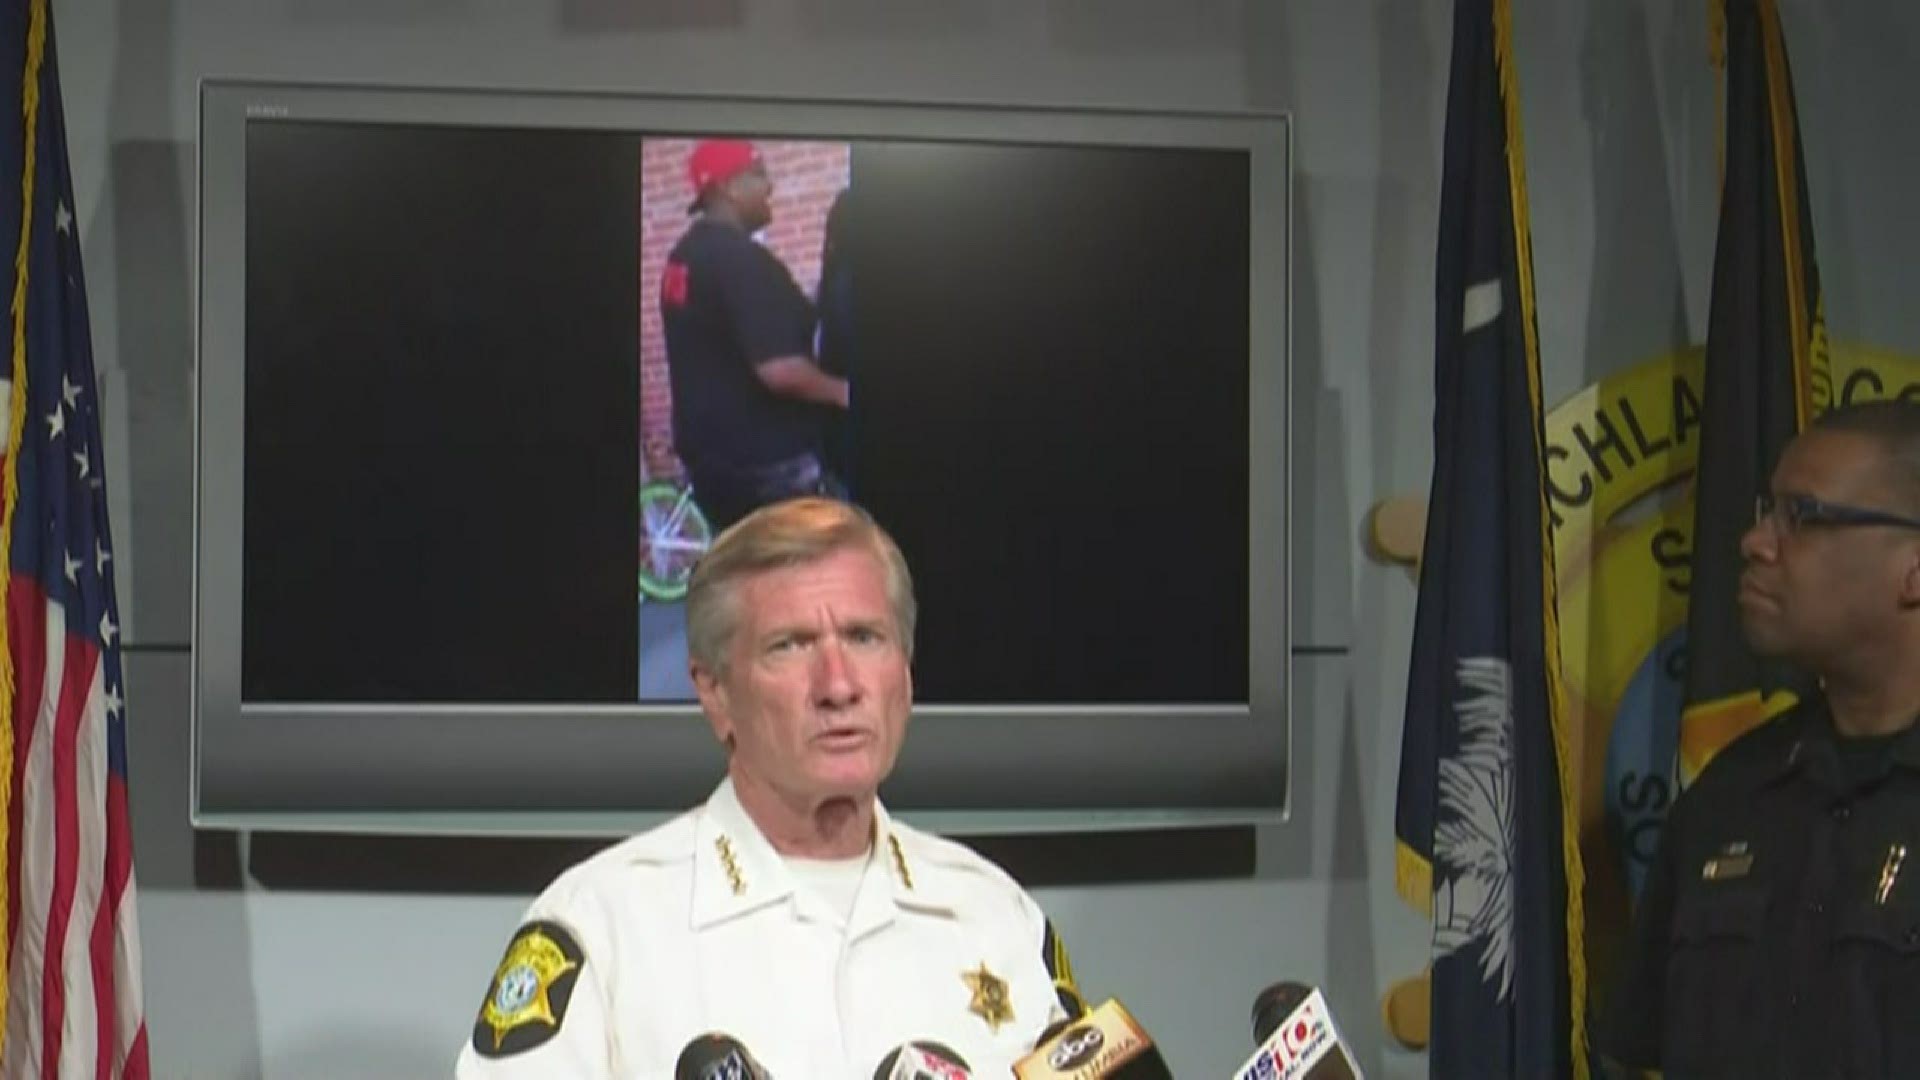 Sheriff Lott's press conference with the Columbia Police Department to announce further arrests in connection with violence durning the protests weekend of May 30